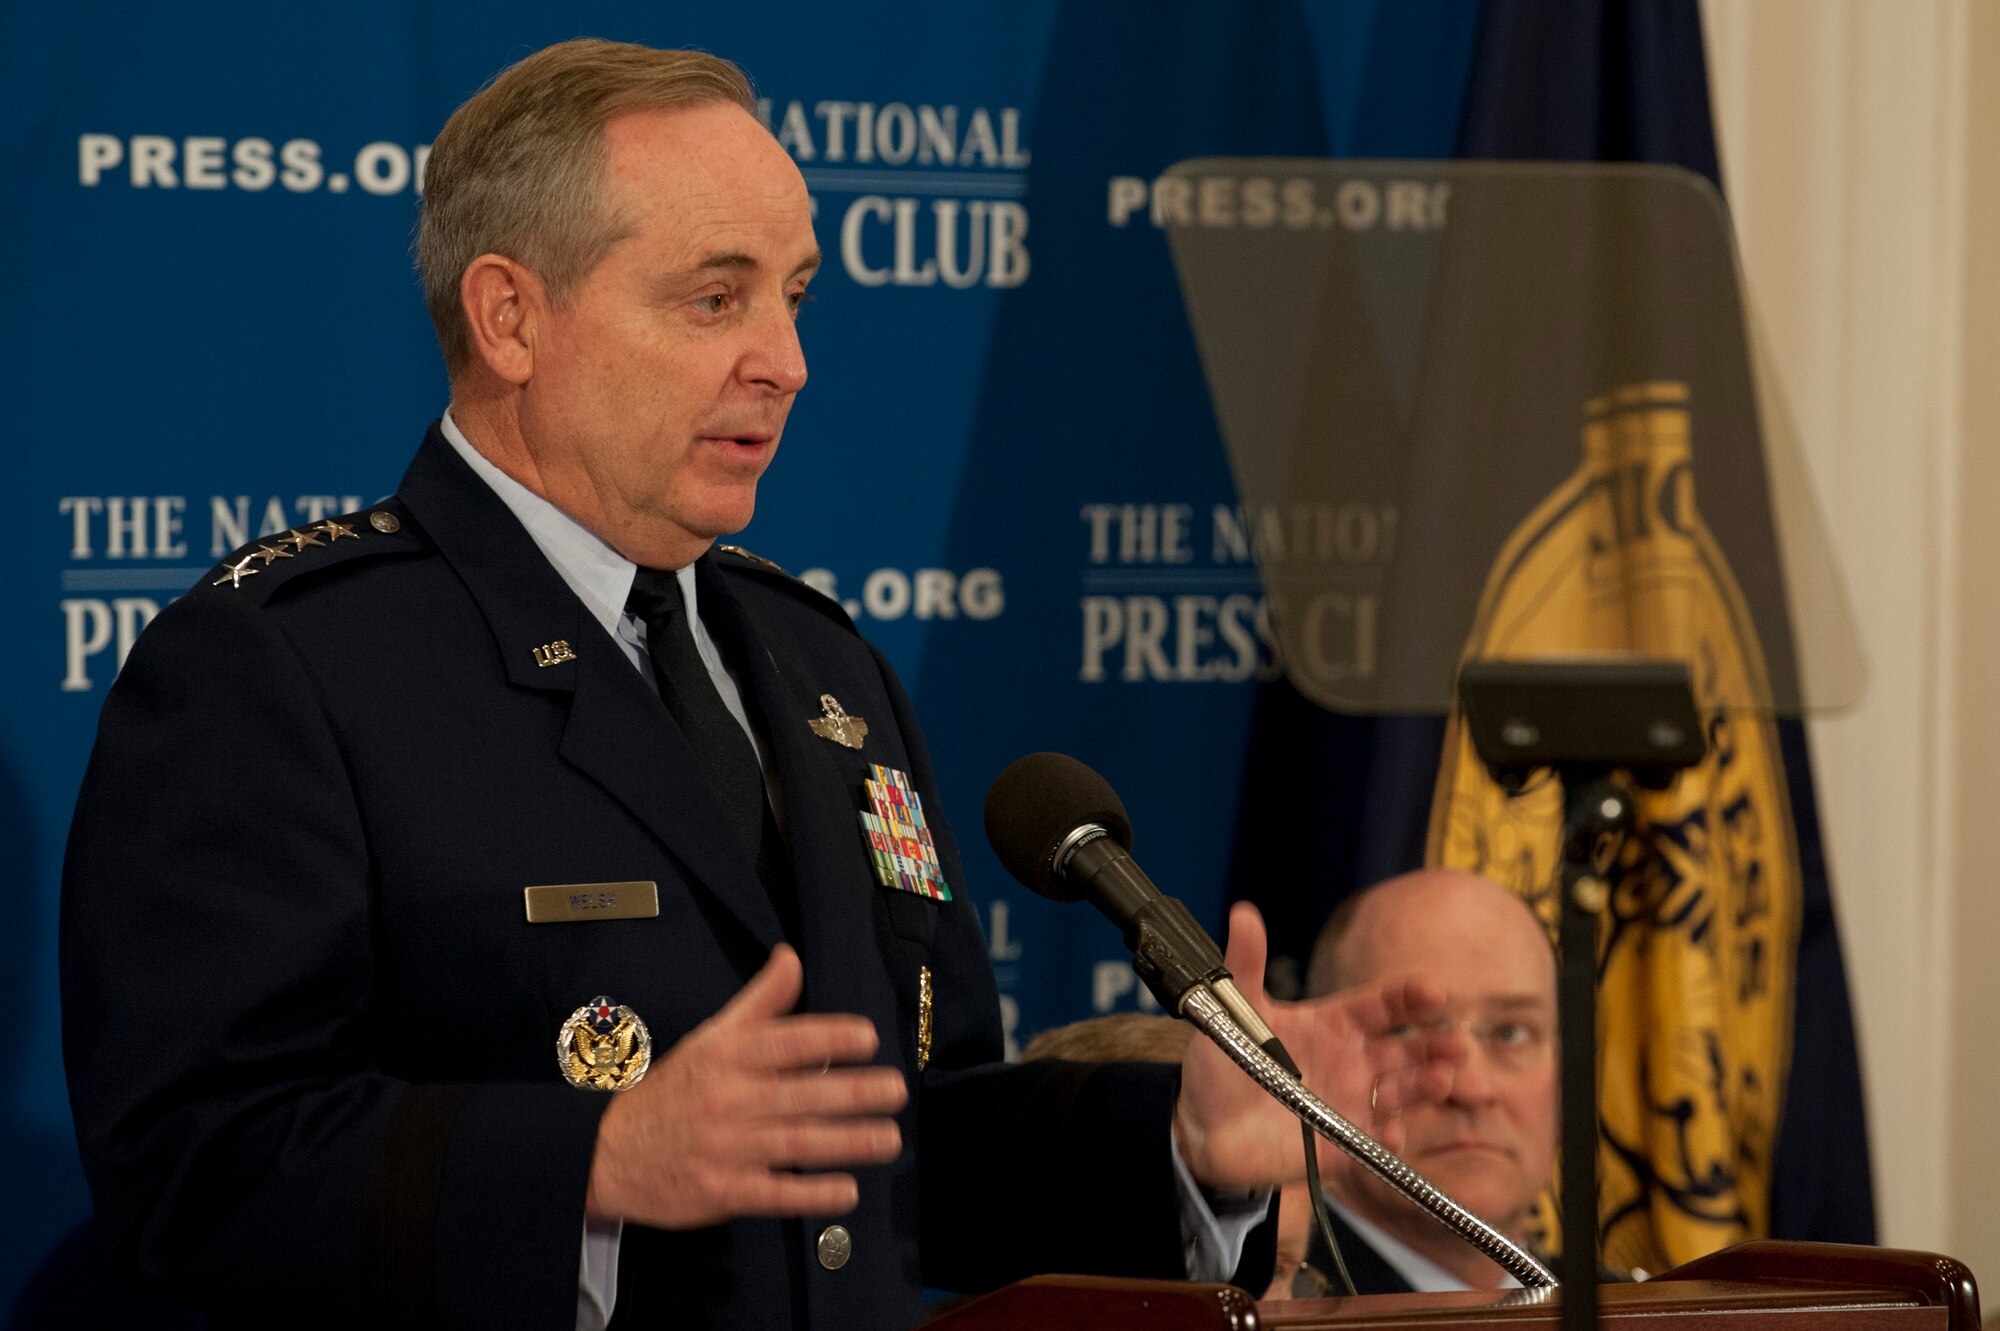 Air Force Chief of Staff Gen. Mark A. Welsh III speaks at the National Press Club in Washington, April 23, 2014. Welsh provided attendees a glimpse into the future of the Air Force and completed a question and answer session to conclude the breakfast. (U.S. Air Force photo/Staff Sgt. Carlin Leslie)
